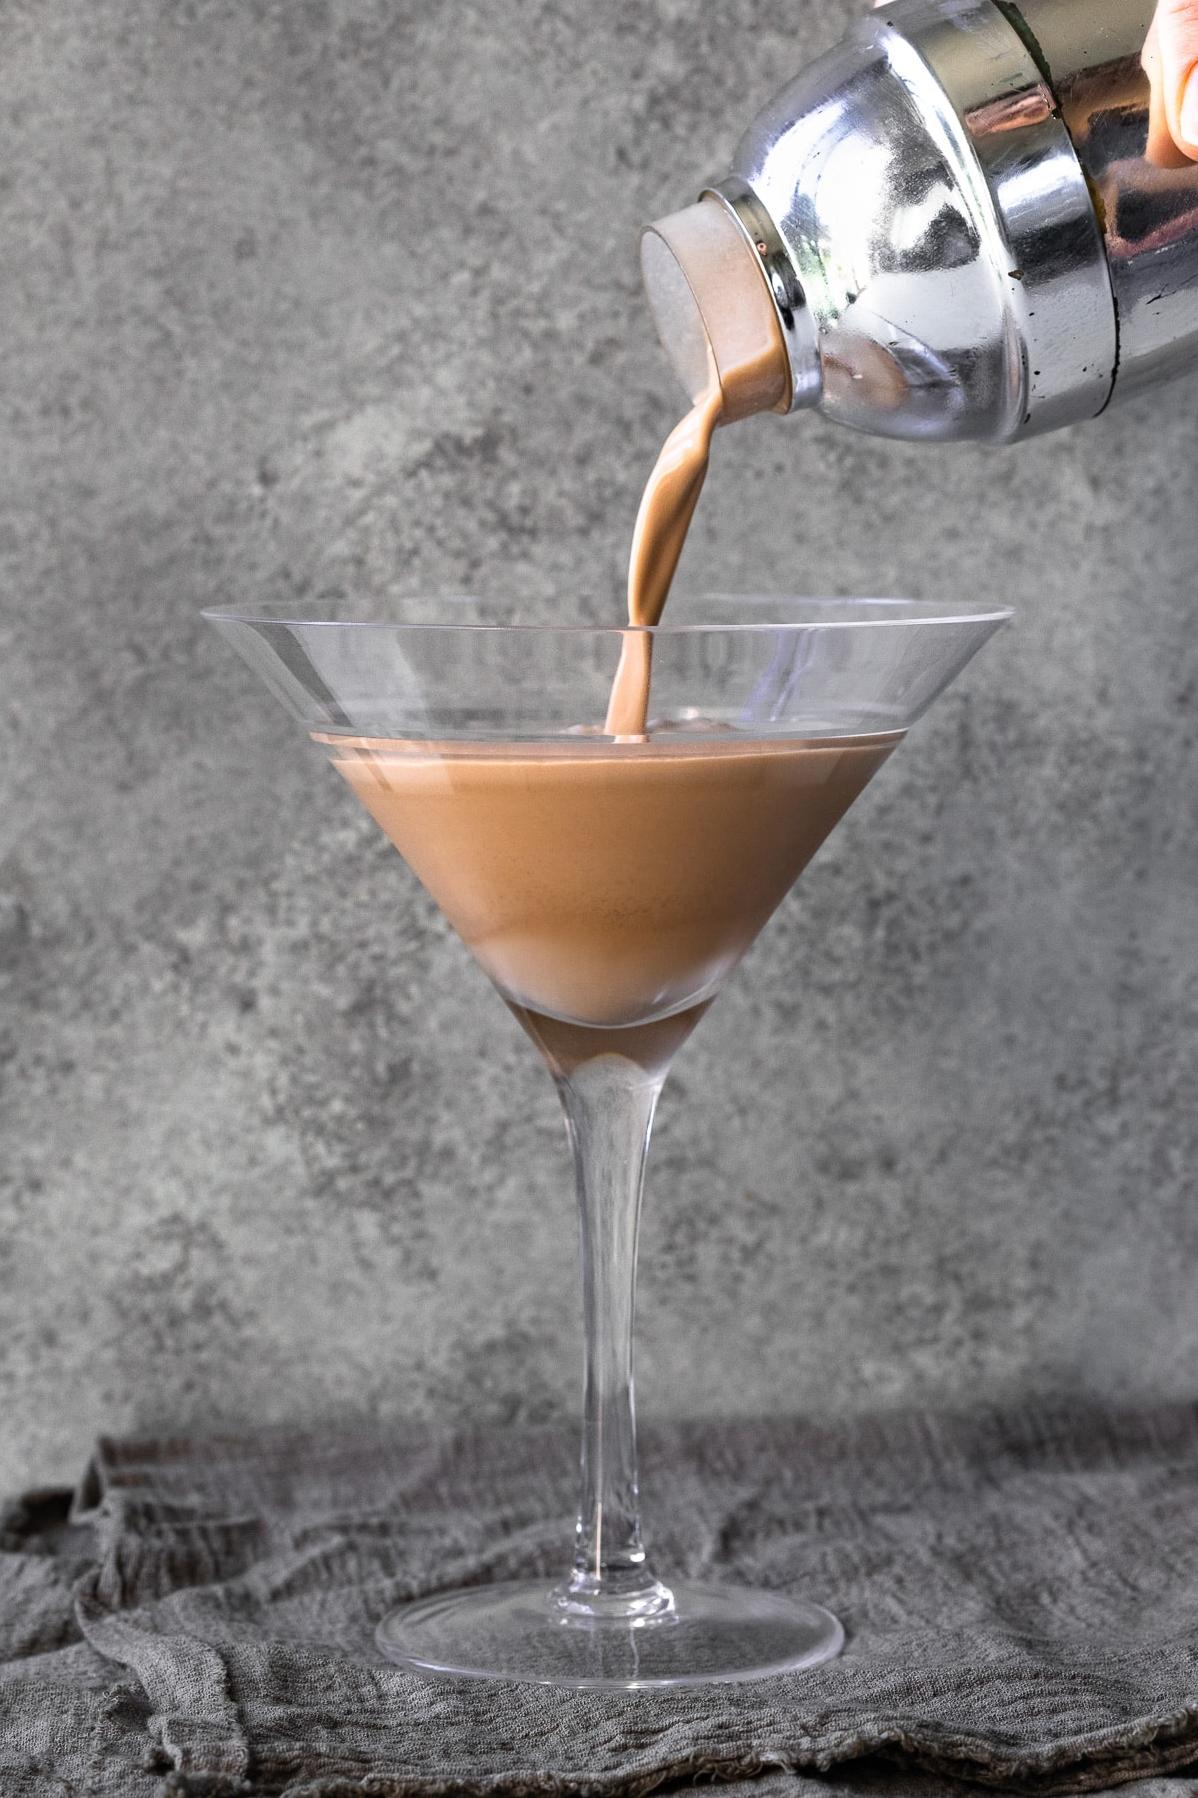  Creamy, sweet, and lightly boozy - this Irish cream recipe hits all the right spots.